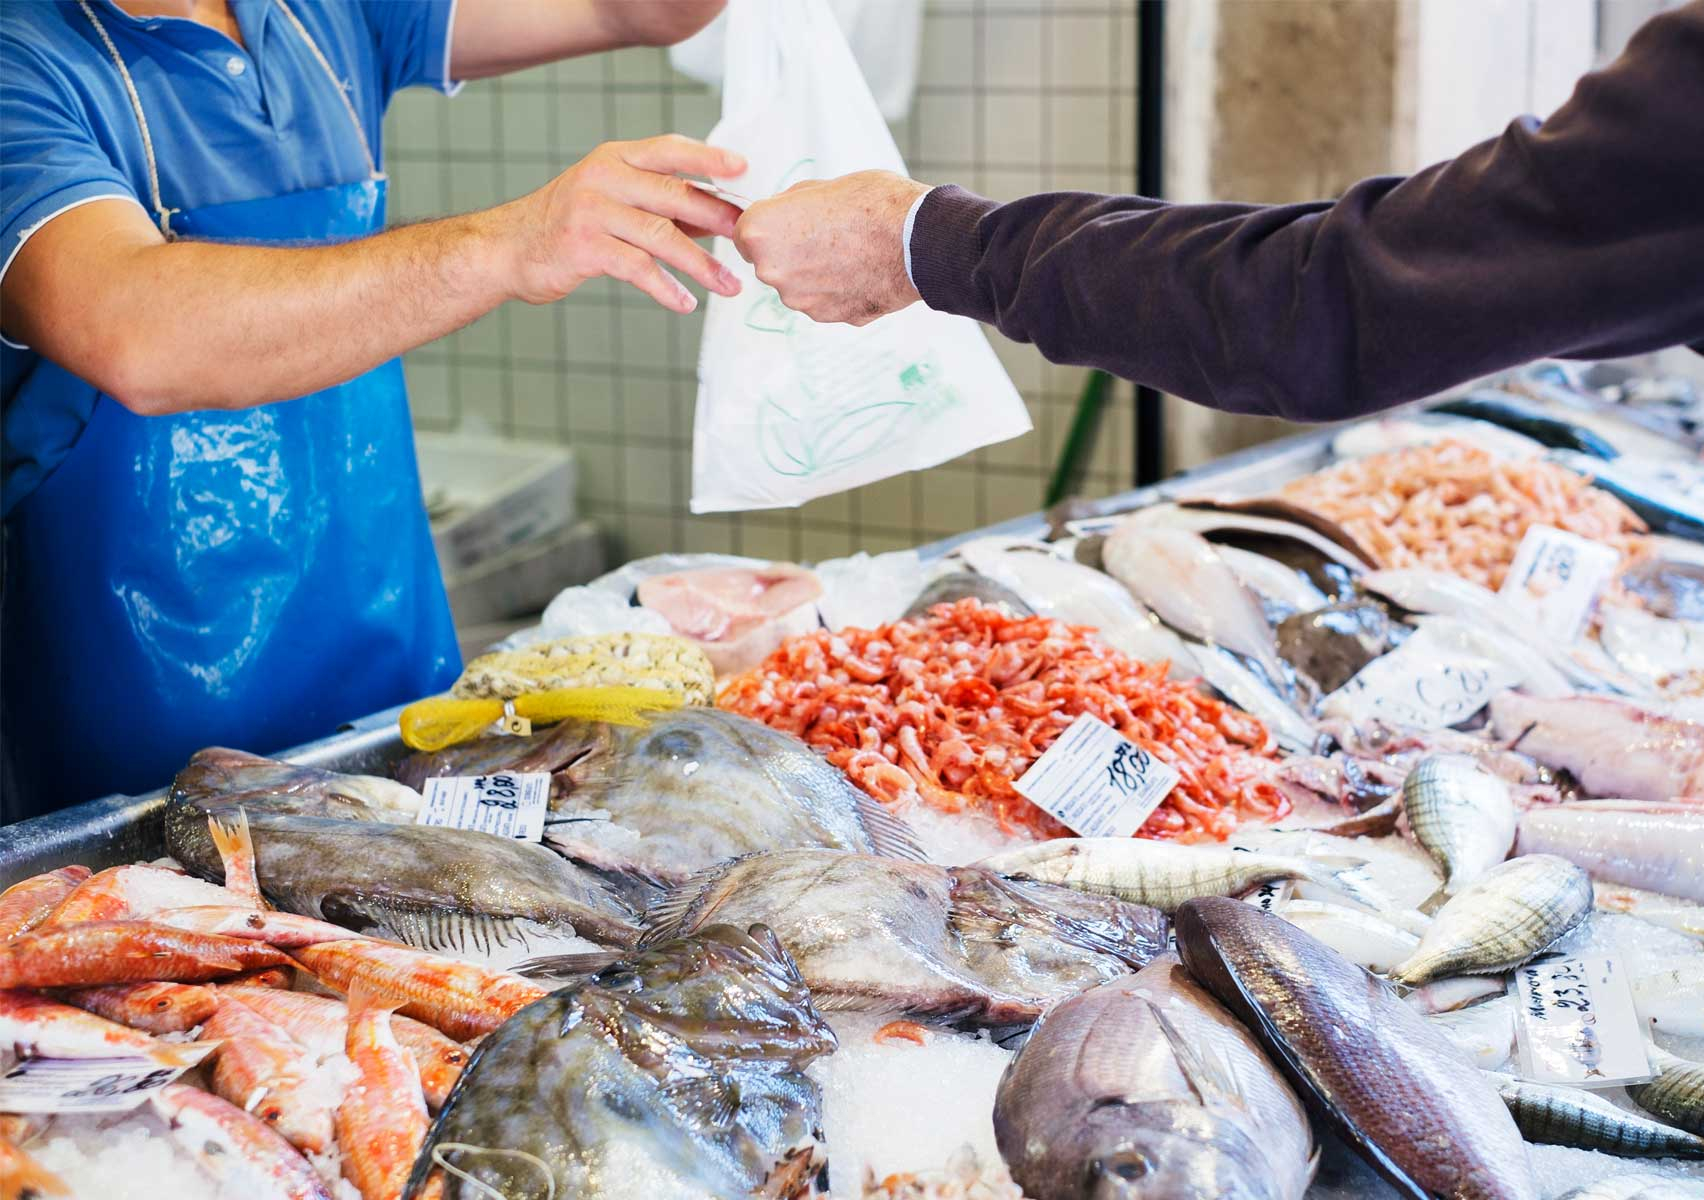 The long supply chain for seafood makes it vulnerable to various forms of fraud. Photo: Getty Images/Gary Yeowell